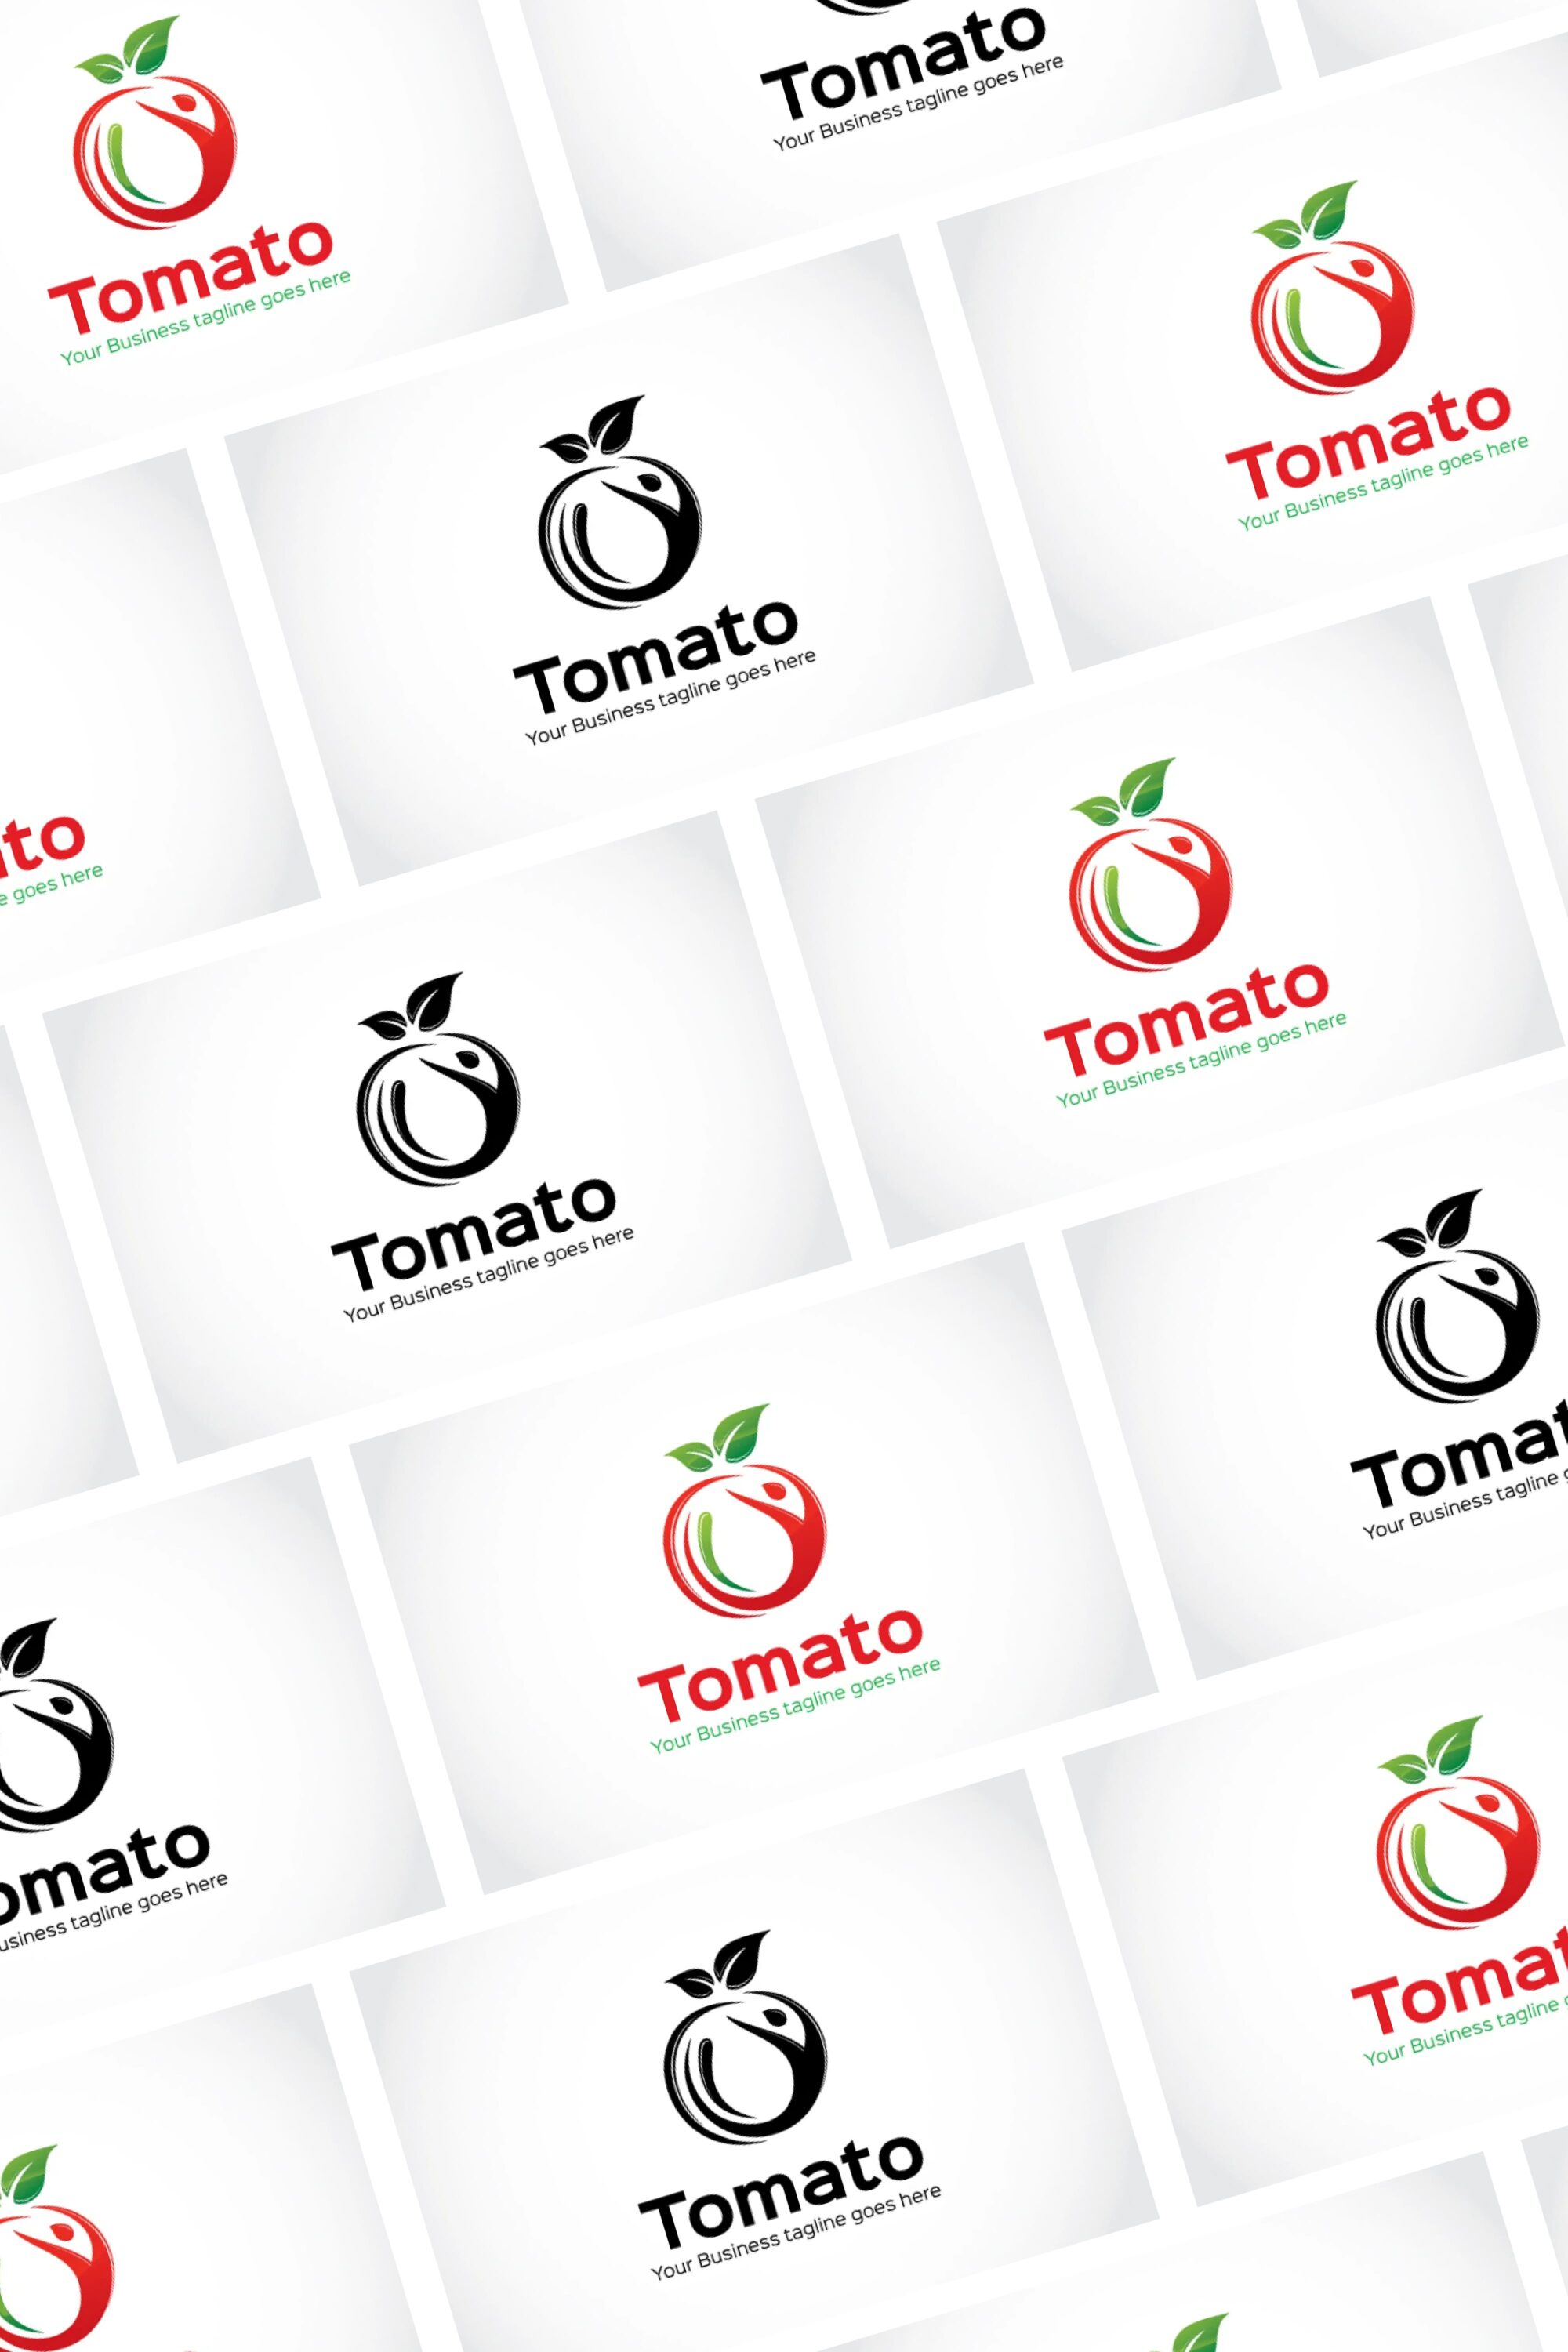 Such a beautiful green logos for tomato.